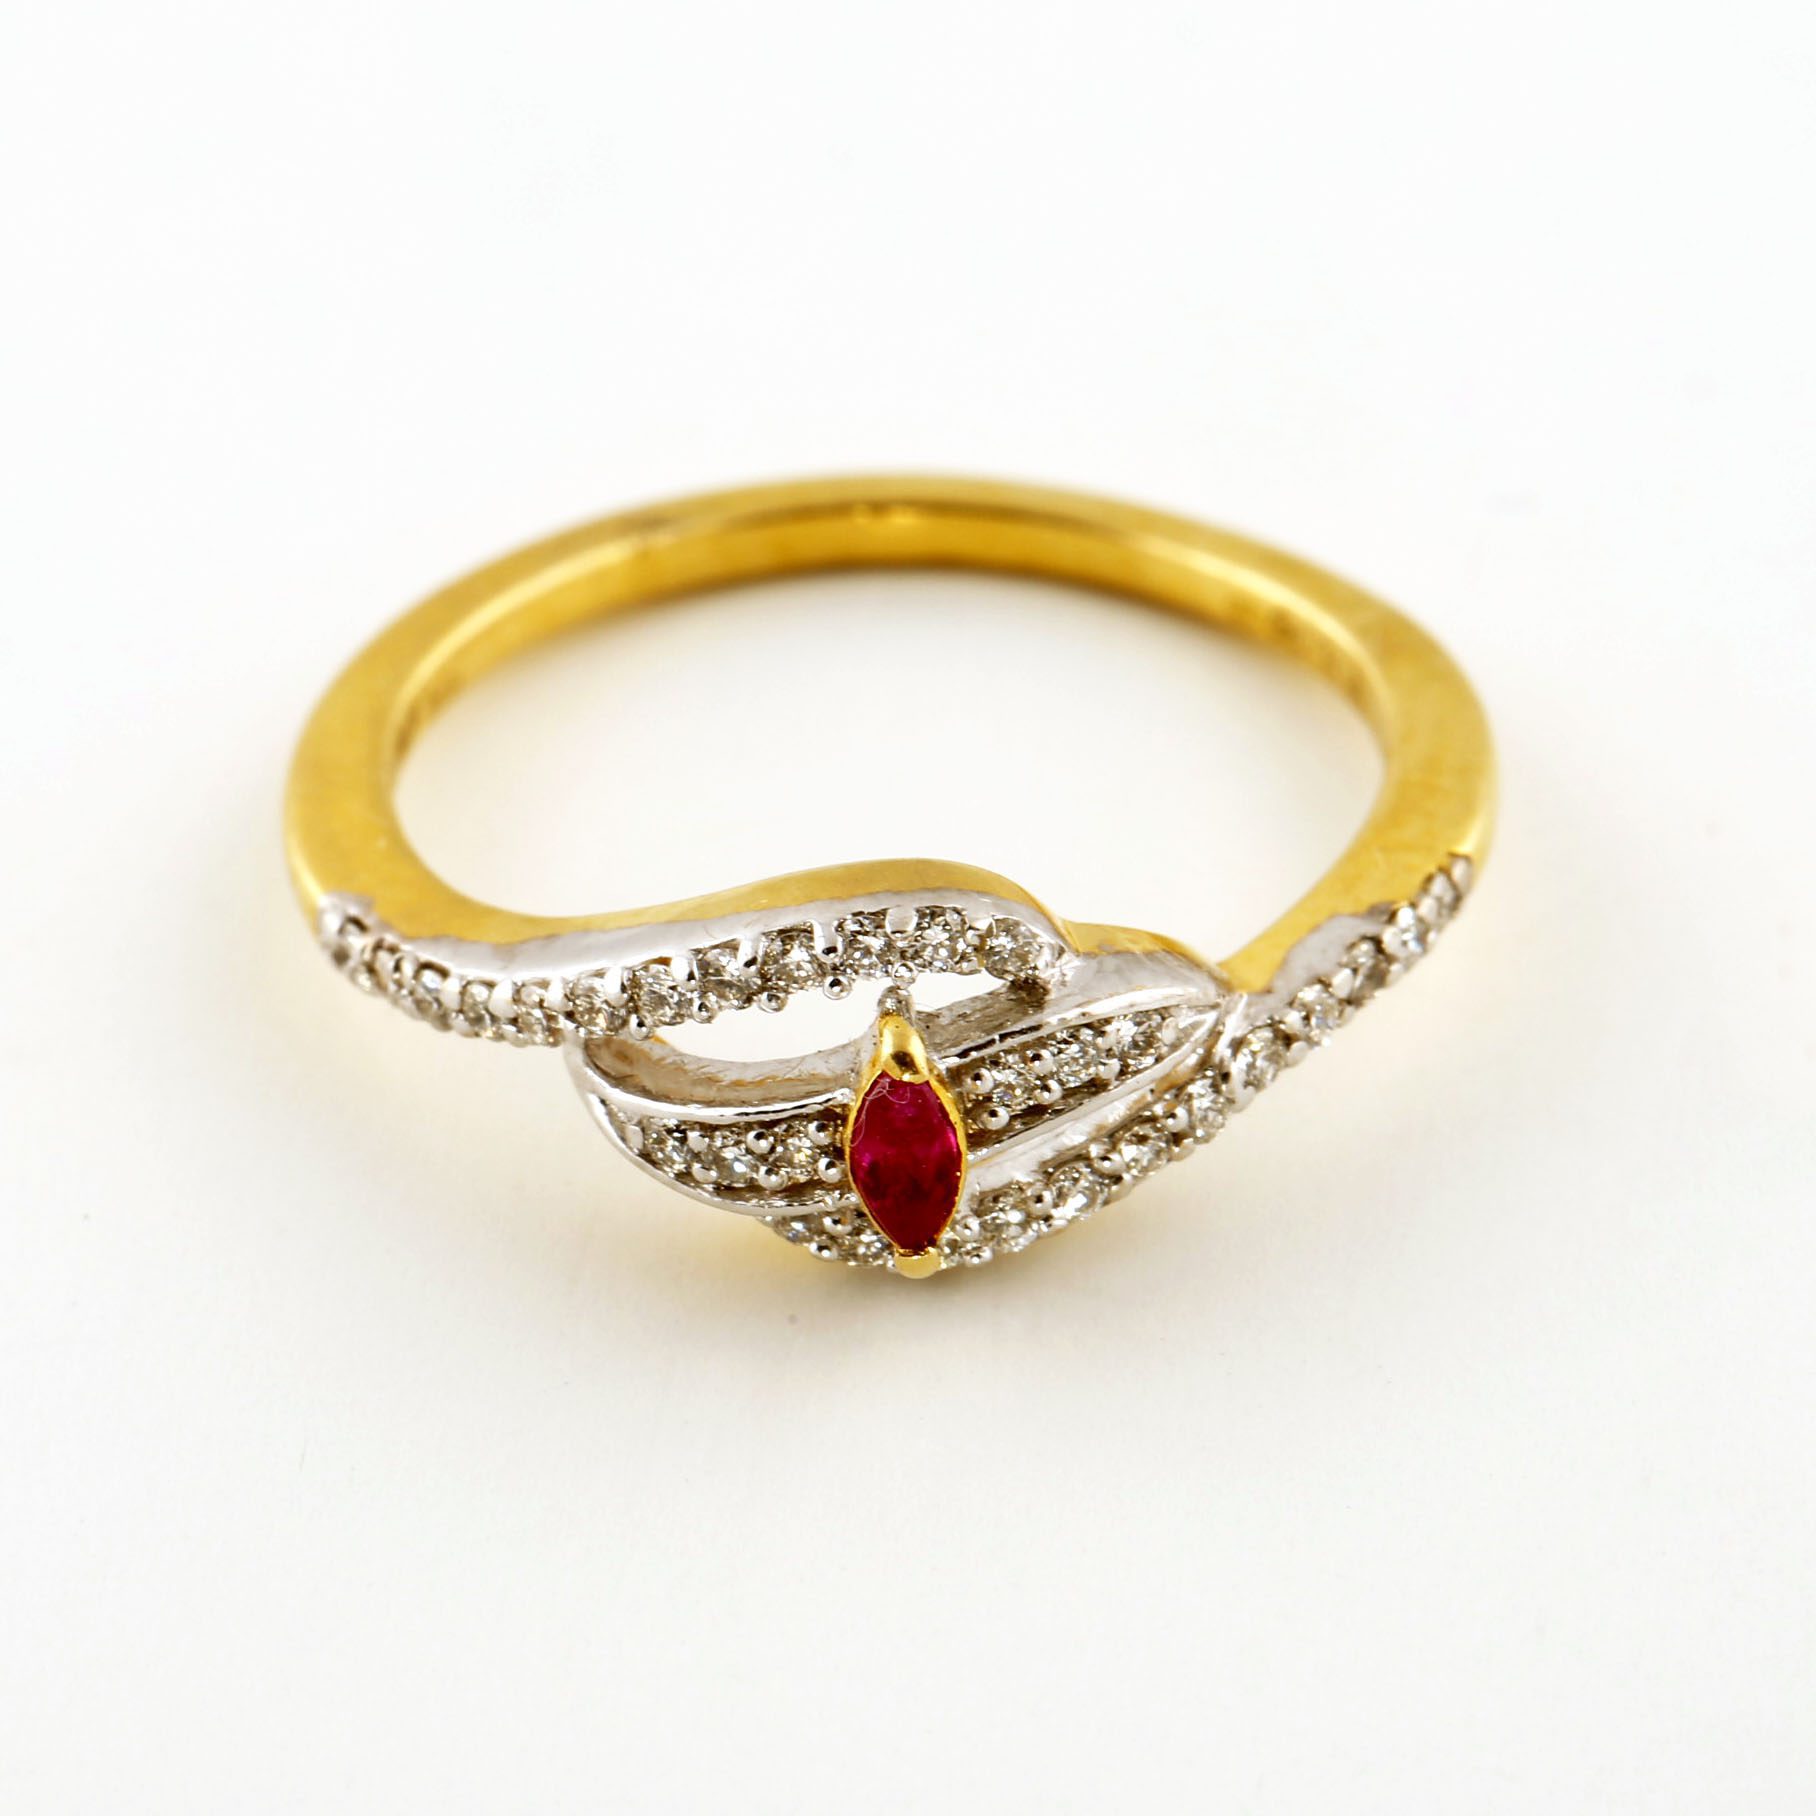 Ruby Ring - 1.87 ctw Burmese Ruby and Diamond Ring in 14k yellow gold  (R-5383)